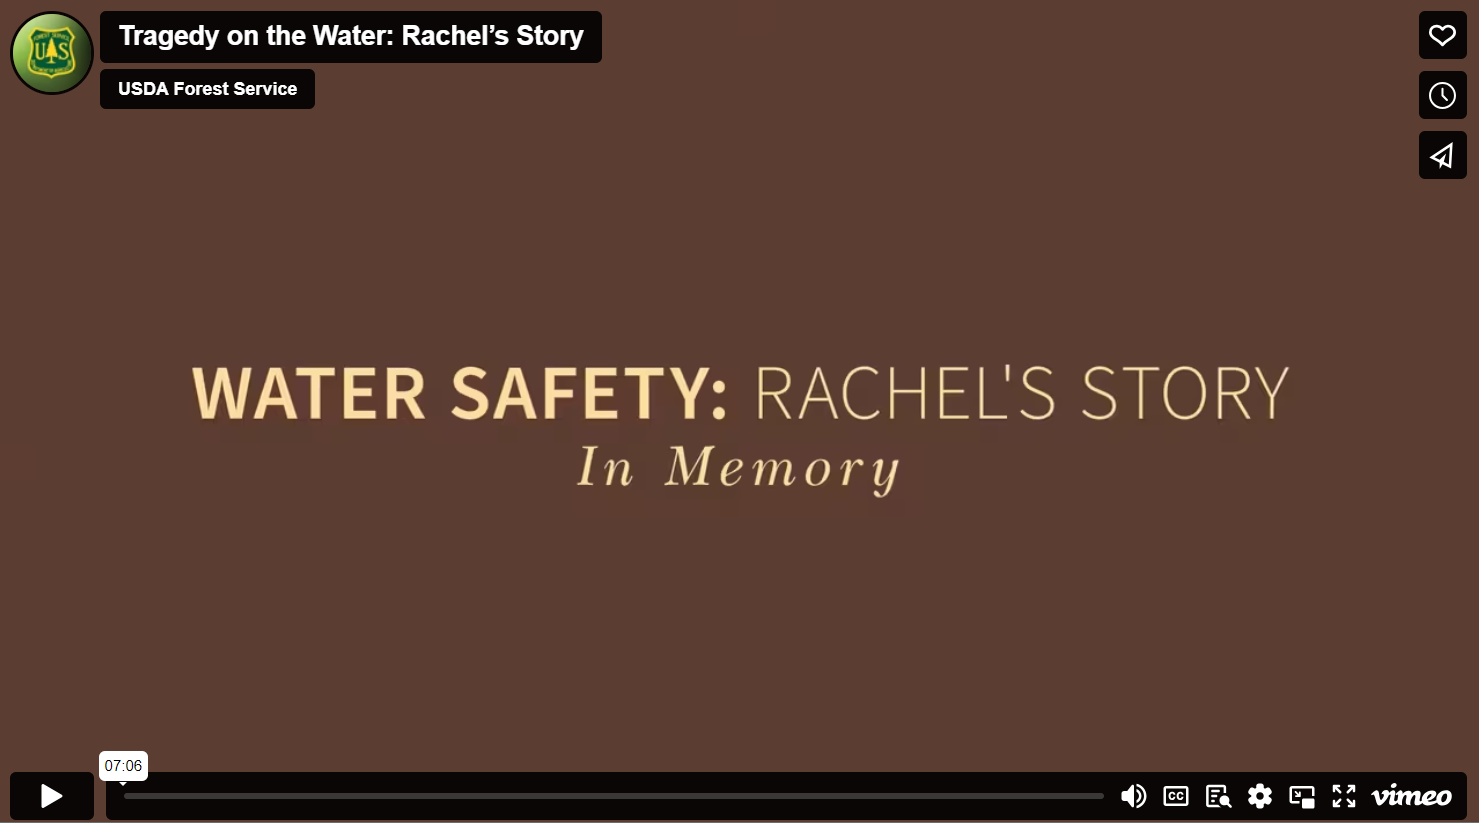 Video player for Forest News Episode 25 on the topic of Tragedy on the Water: Rachel’s Story